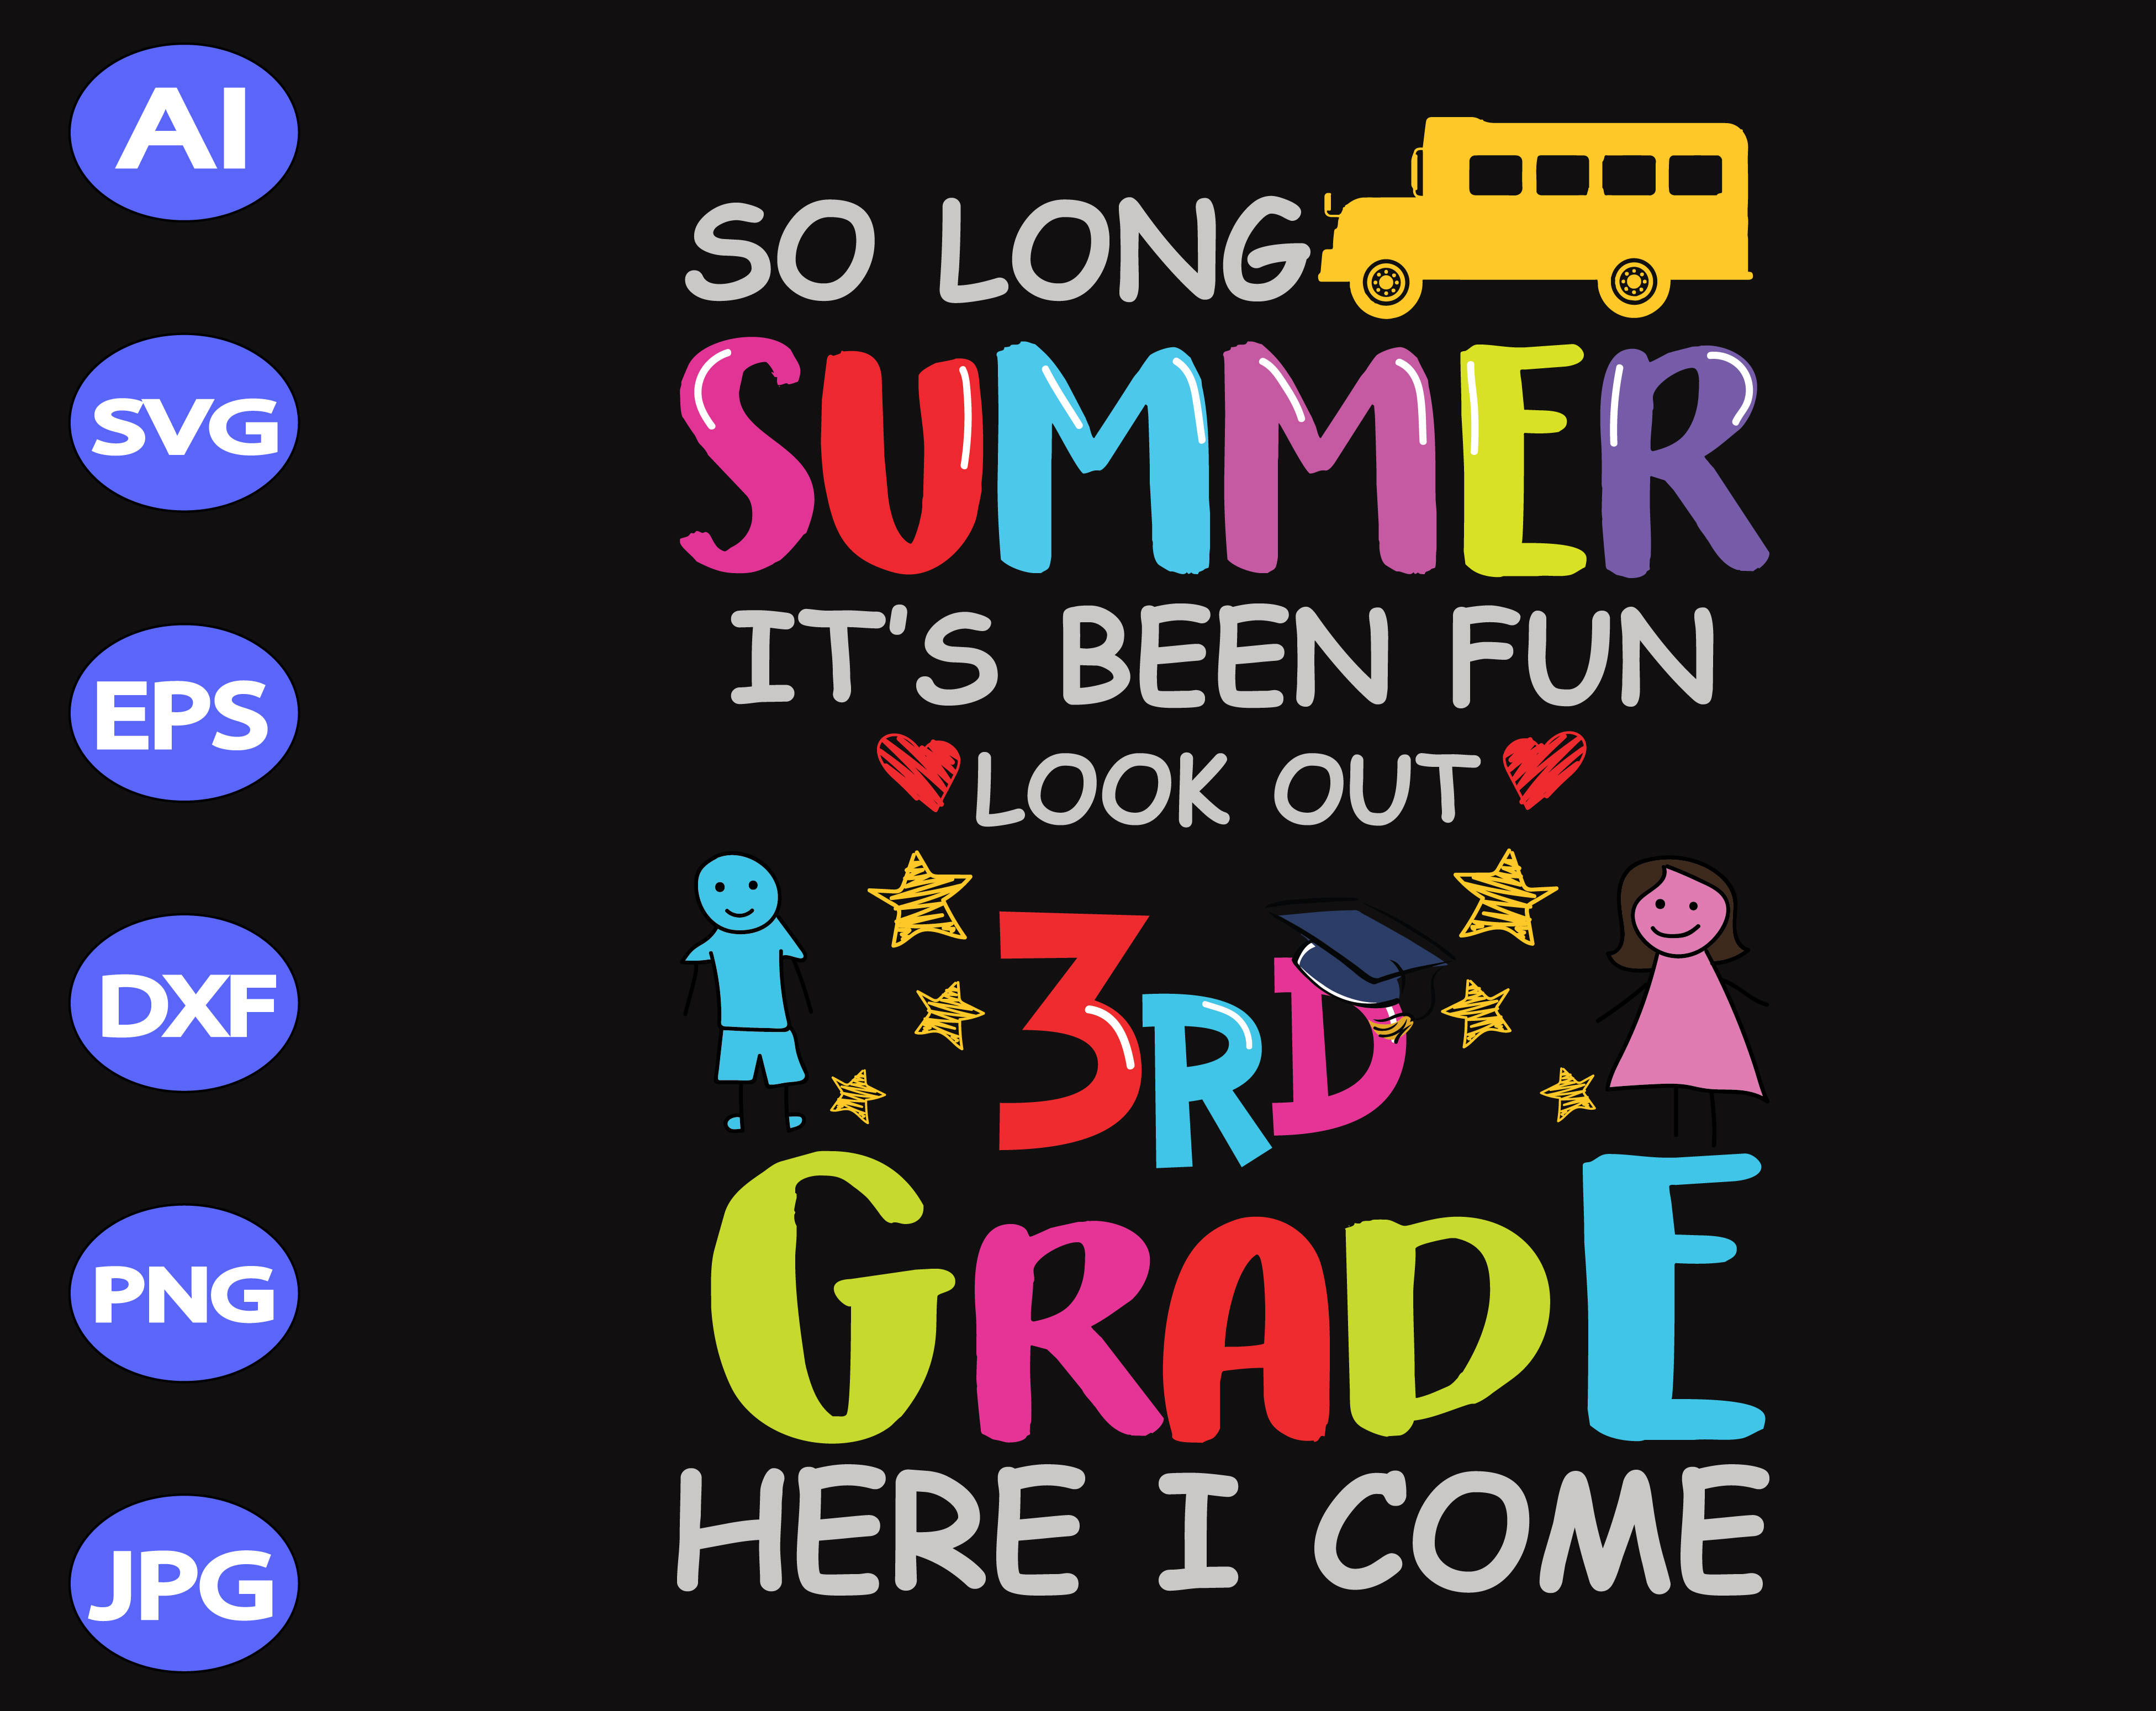 Download So Long Summer It S Been Fun Look Out 3rd Grade Here I Come Svg Dxf Eps Png Digital Download Designbtf Com